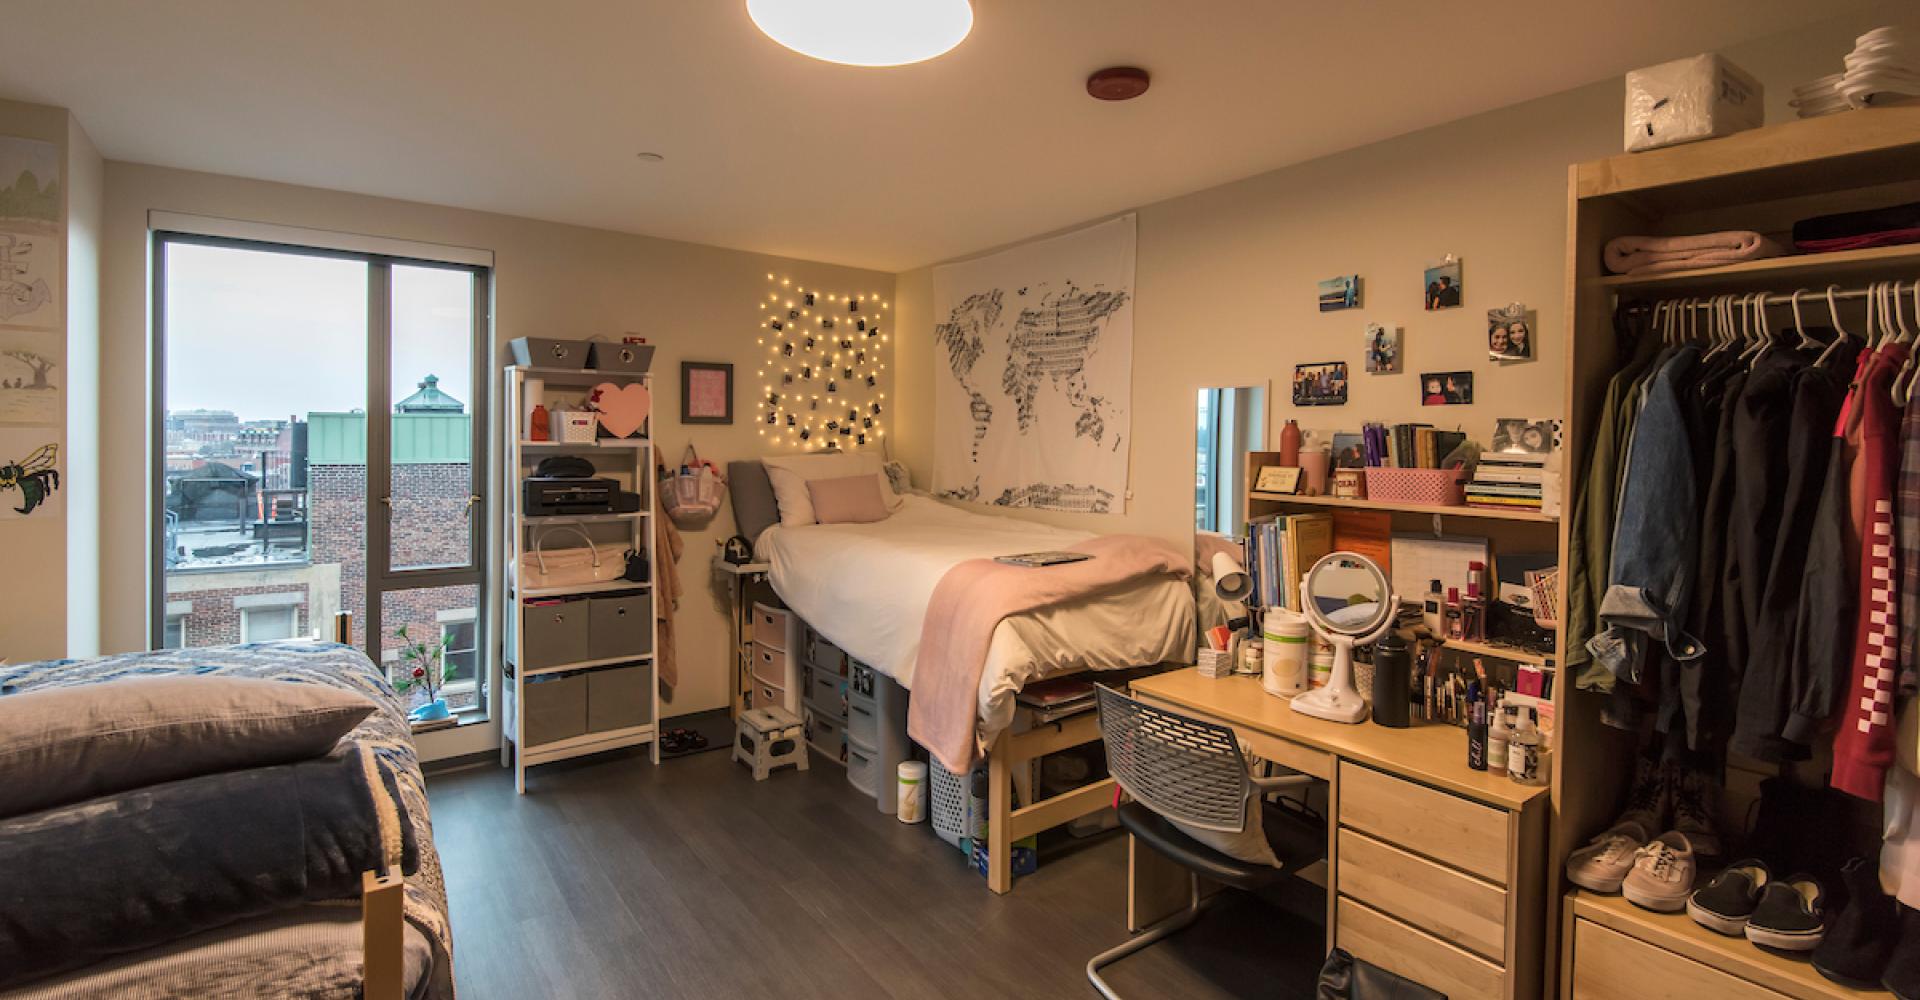 A dorm room decorated in the Student Life and Performance Center, with a Boston skyline view visible through the window.